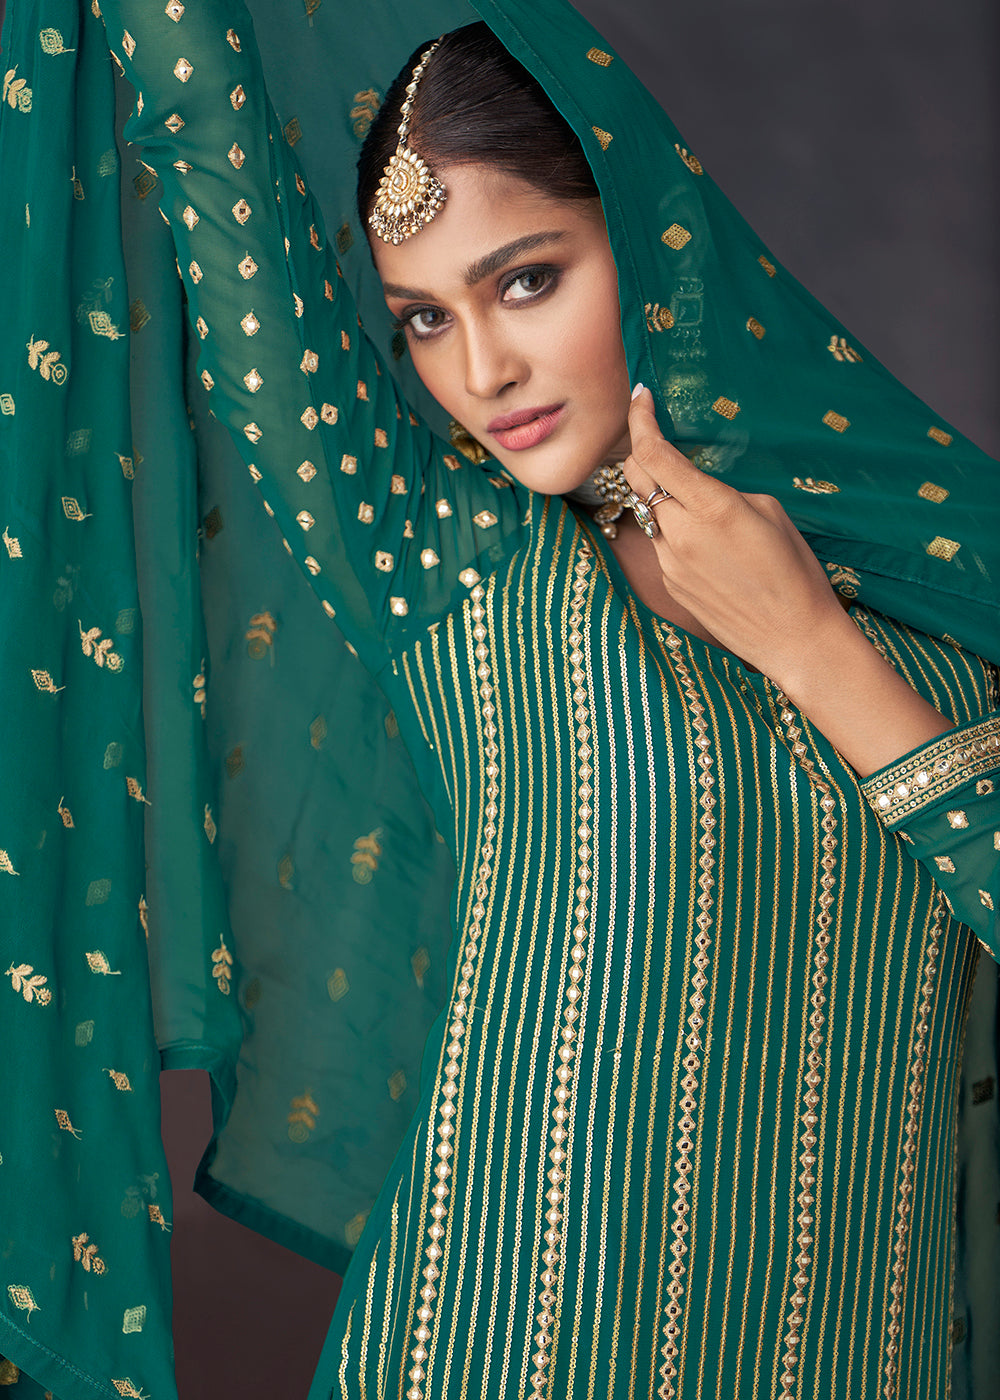 Shop Now Jade Green Georgette Embellished Festive Sharara Suit Online at Empress Clothing in USA, UK, Canada & Worldwide. 